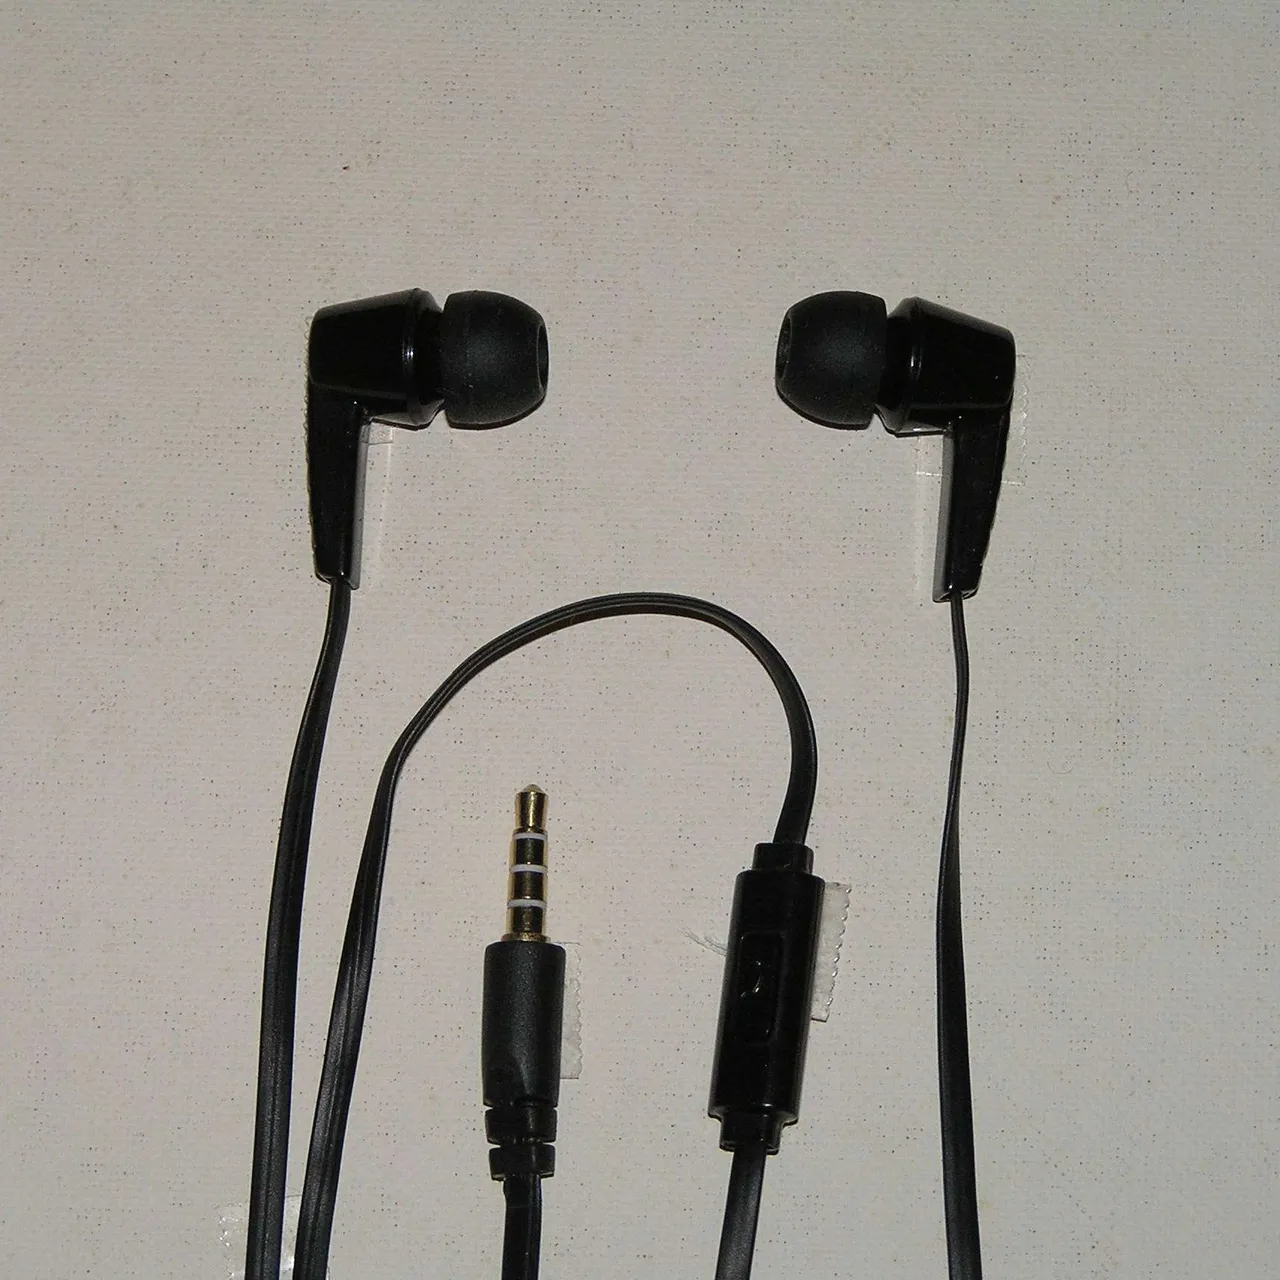 Miscellaneous used earbuds photo 1